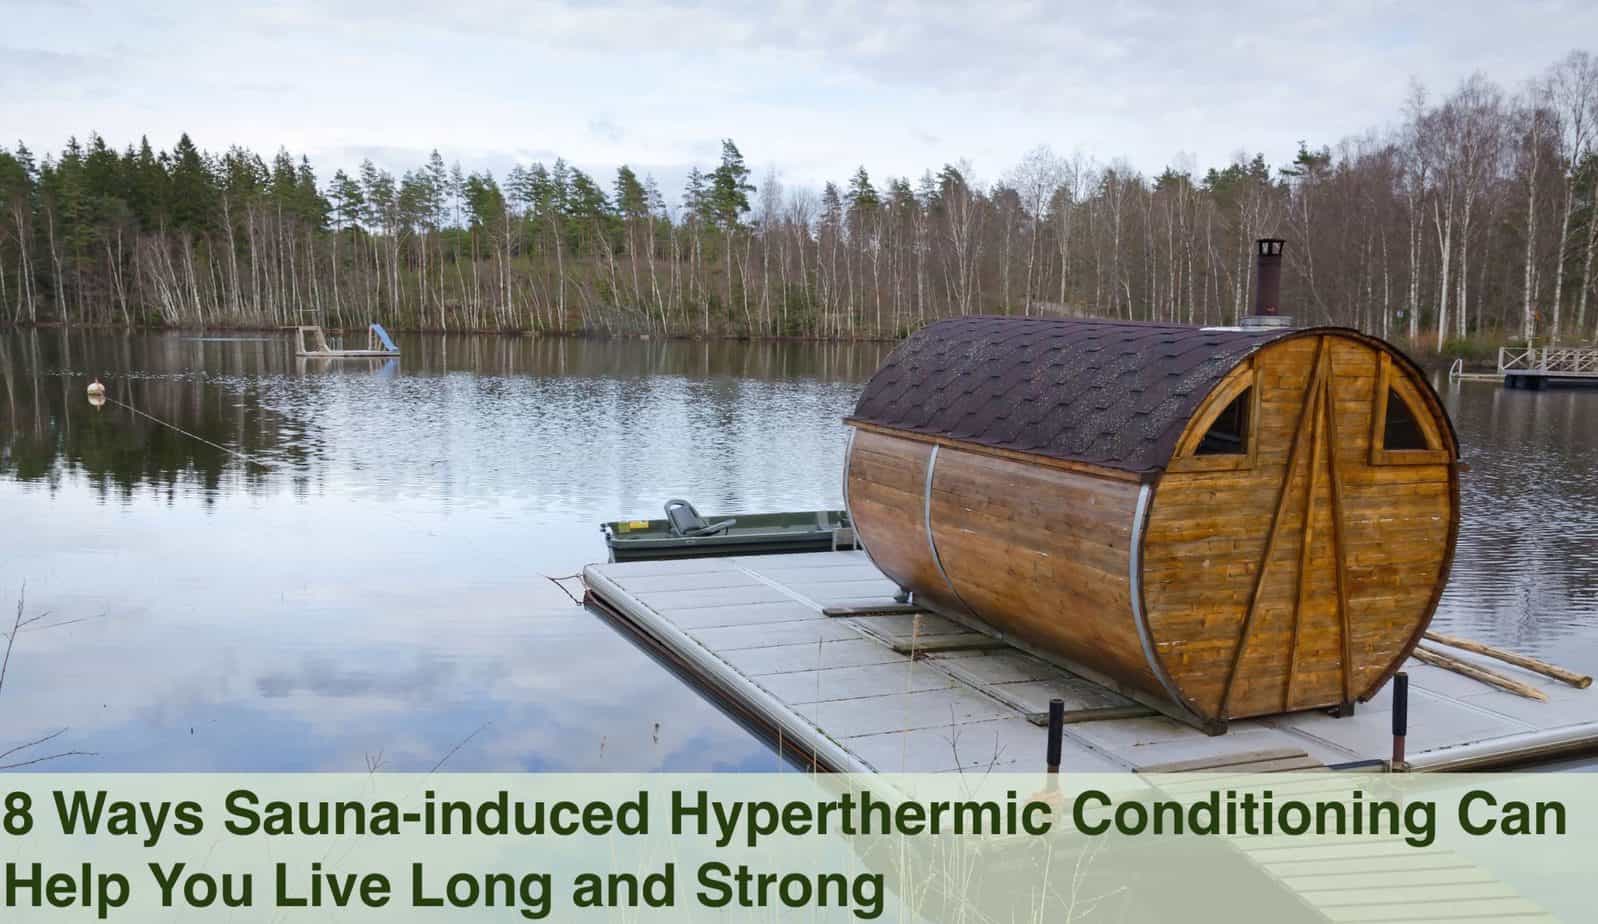 Sauna-induced Hyperthermic Conditioning Can Help You Live Long and Strong